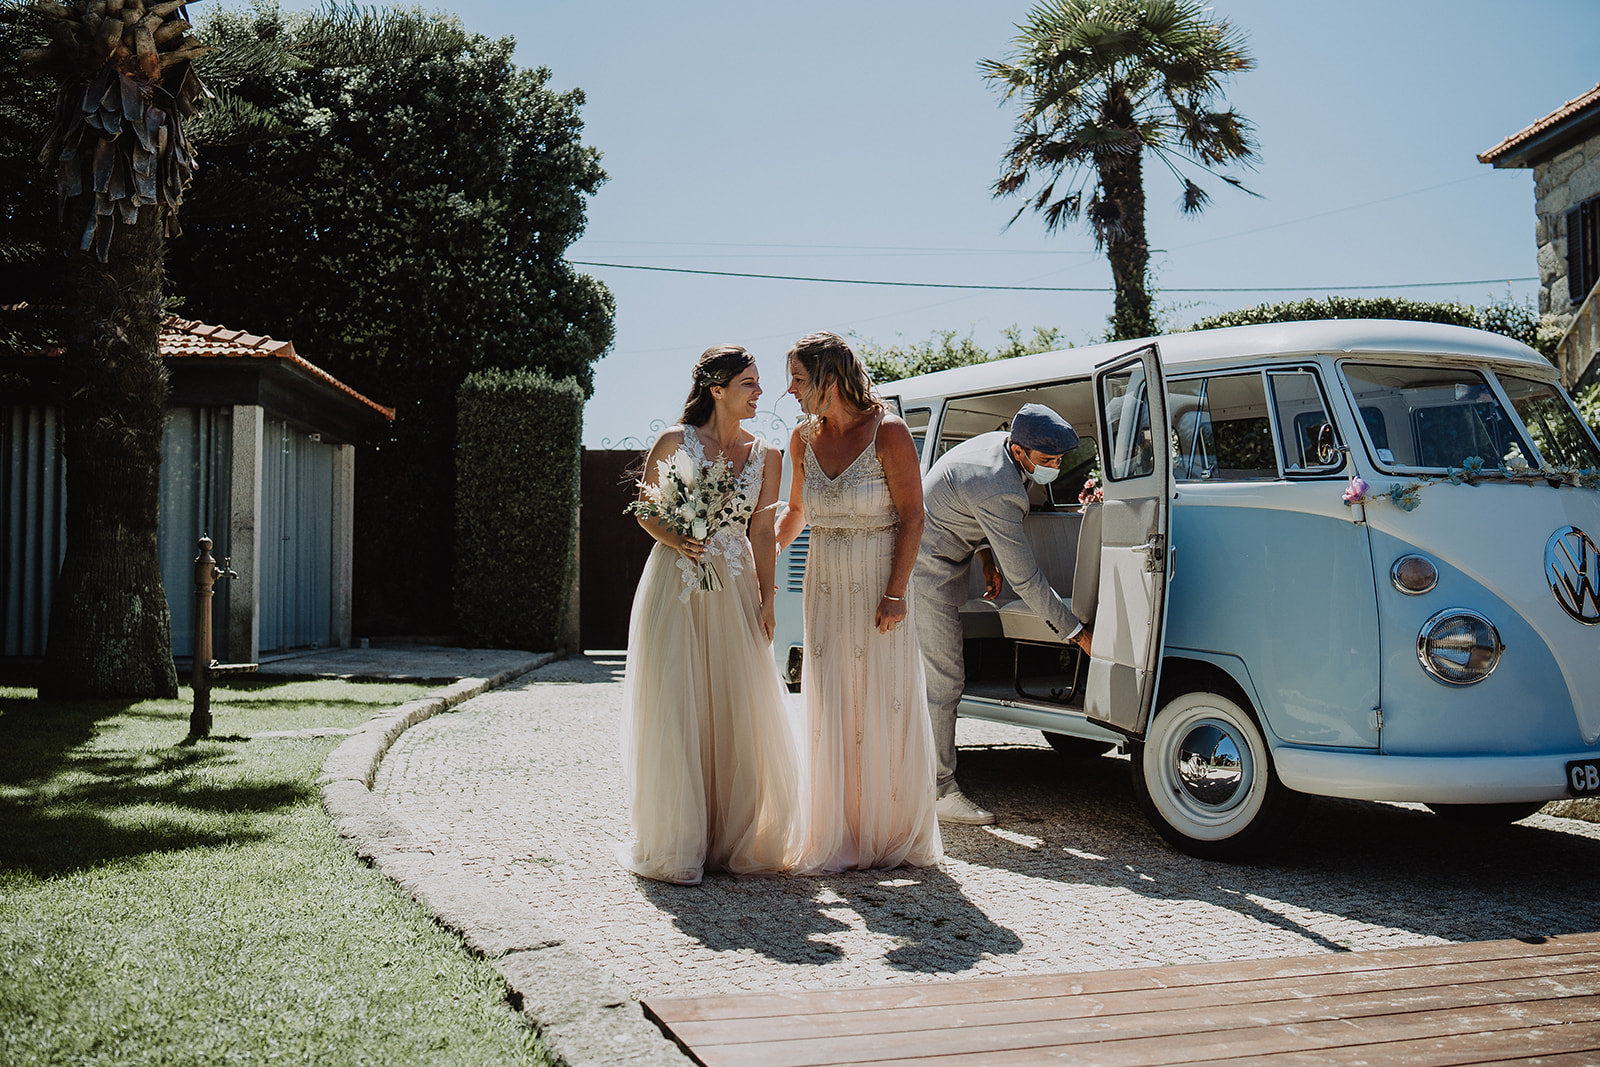 The Bride and Mother of the Bride stand together in their beautiful pre-loved dresses, with the Bride holding flowers. They stand next to a light blue VW Camper Van with a palm tree in the background.